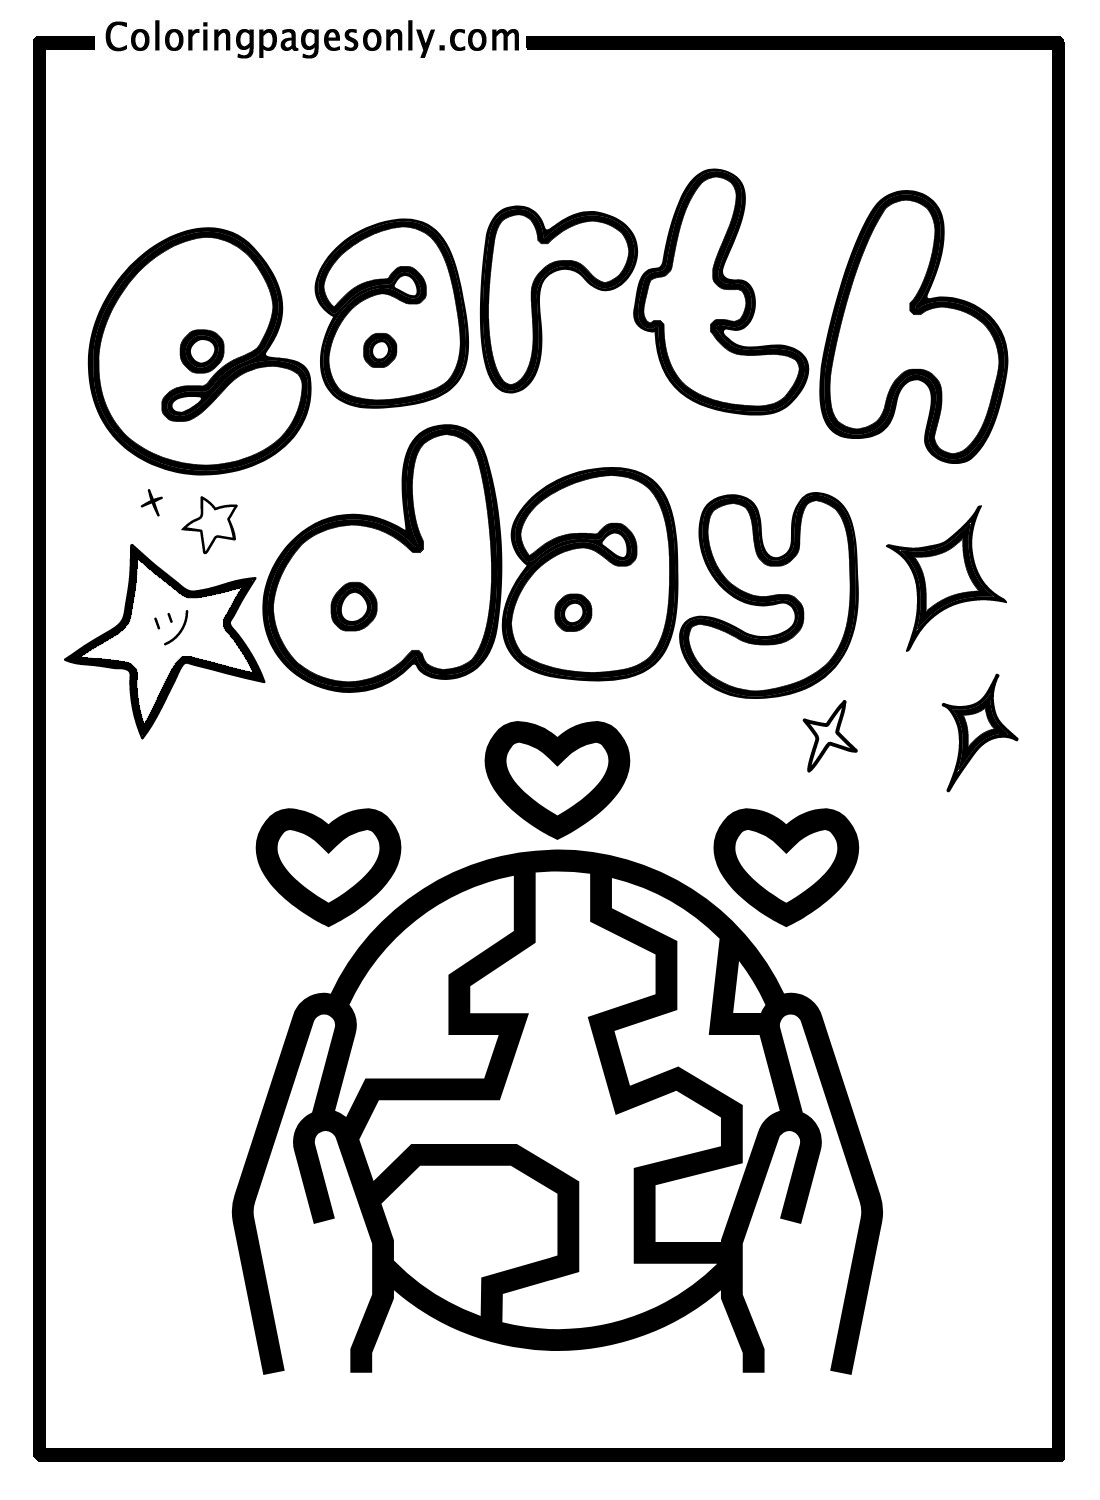 Earth Day Free Coloring Pages